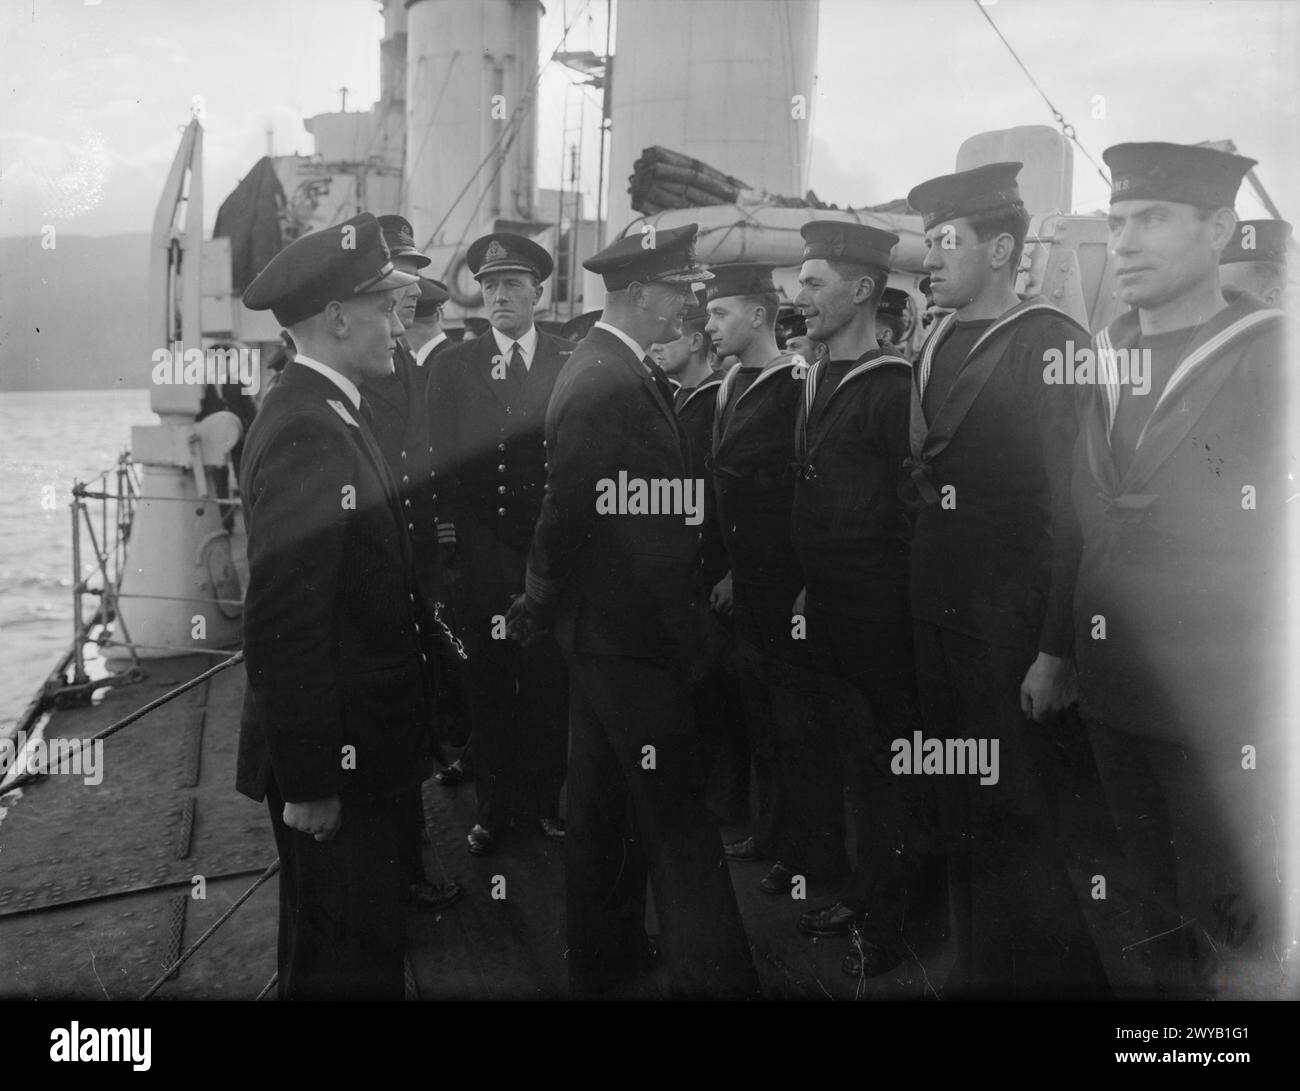 PREPARATIONS FOR NORWEGIAN OPERATIONS. OCTOBER 1941, ON BOARD THE DESTROYER HMS BEDOUIN. HMS VICTORIOUS AND HMS KING GEORGE V ALONG WITH ESCORTING DESTROYERS DURING SEVERAL DAYS OF PREPARATION FOR NORWEGIAN OPERATIONS. - Captain D6, Captain Donald Keppel Bain, RN, inspecting crew on board the destroyer HMS BEDOUIN. , Stock Photo